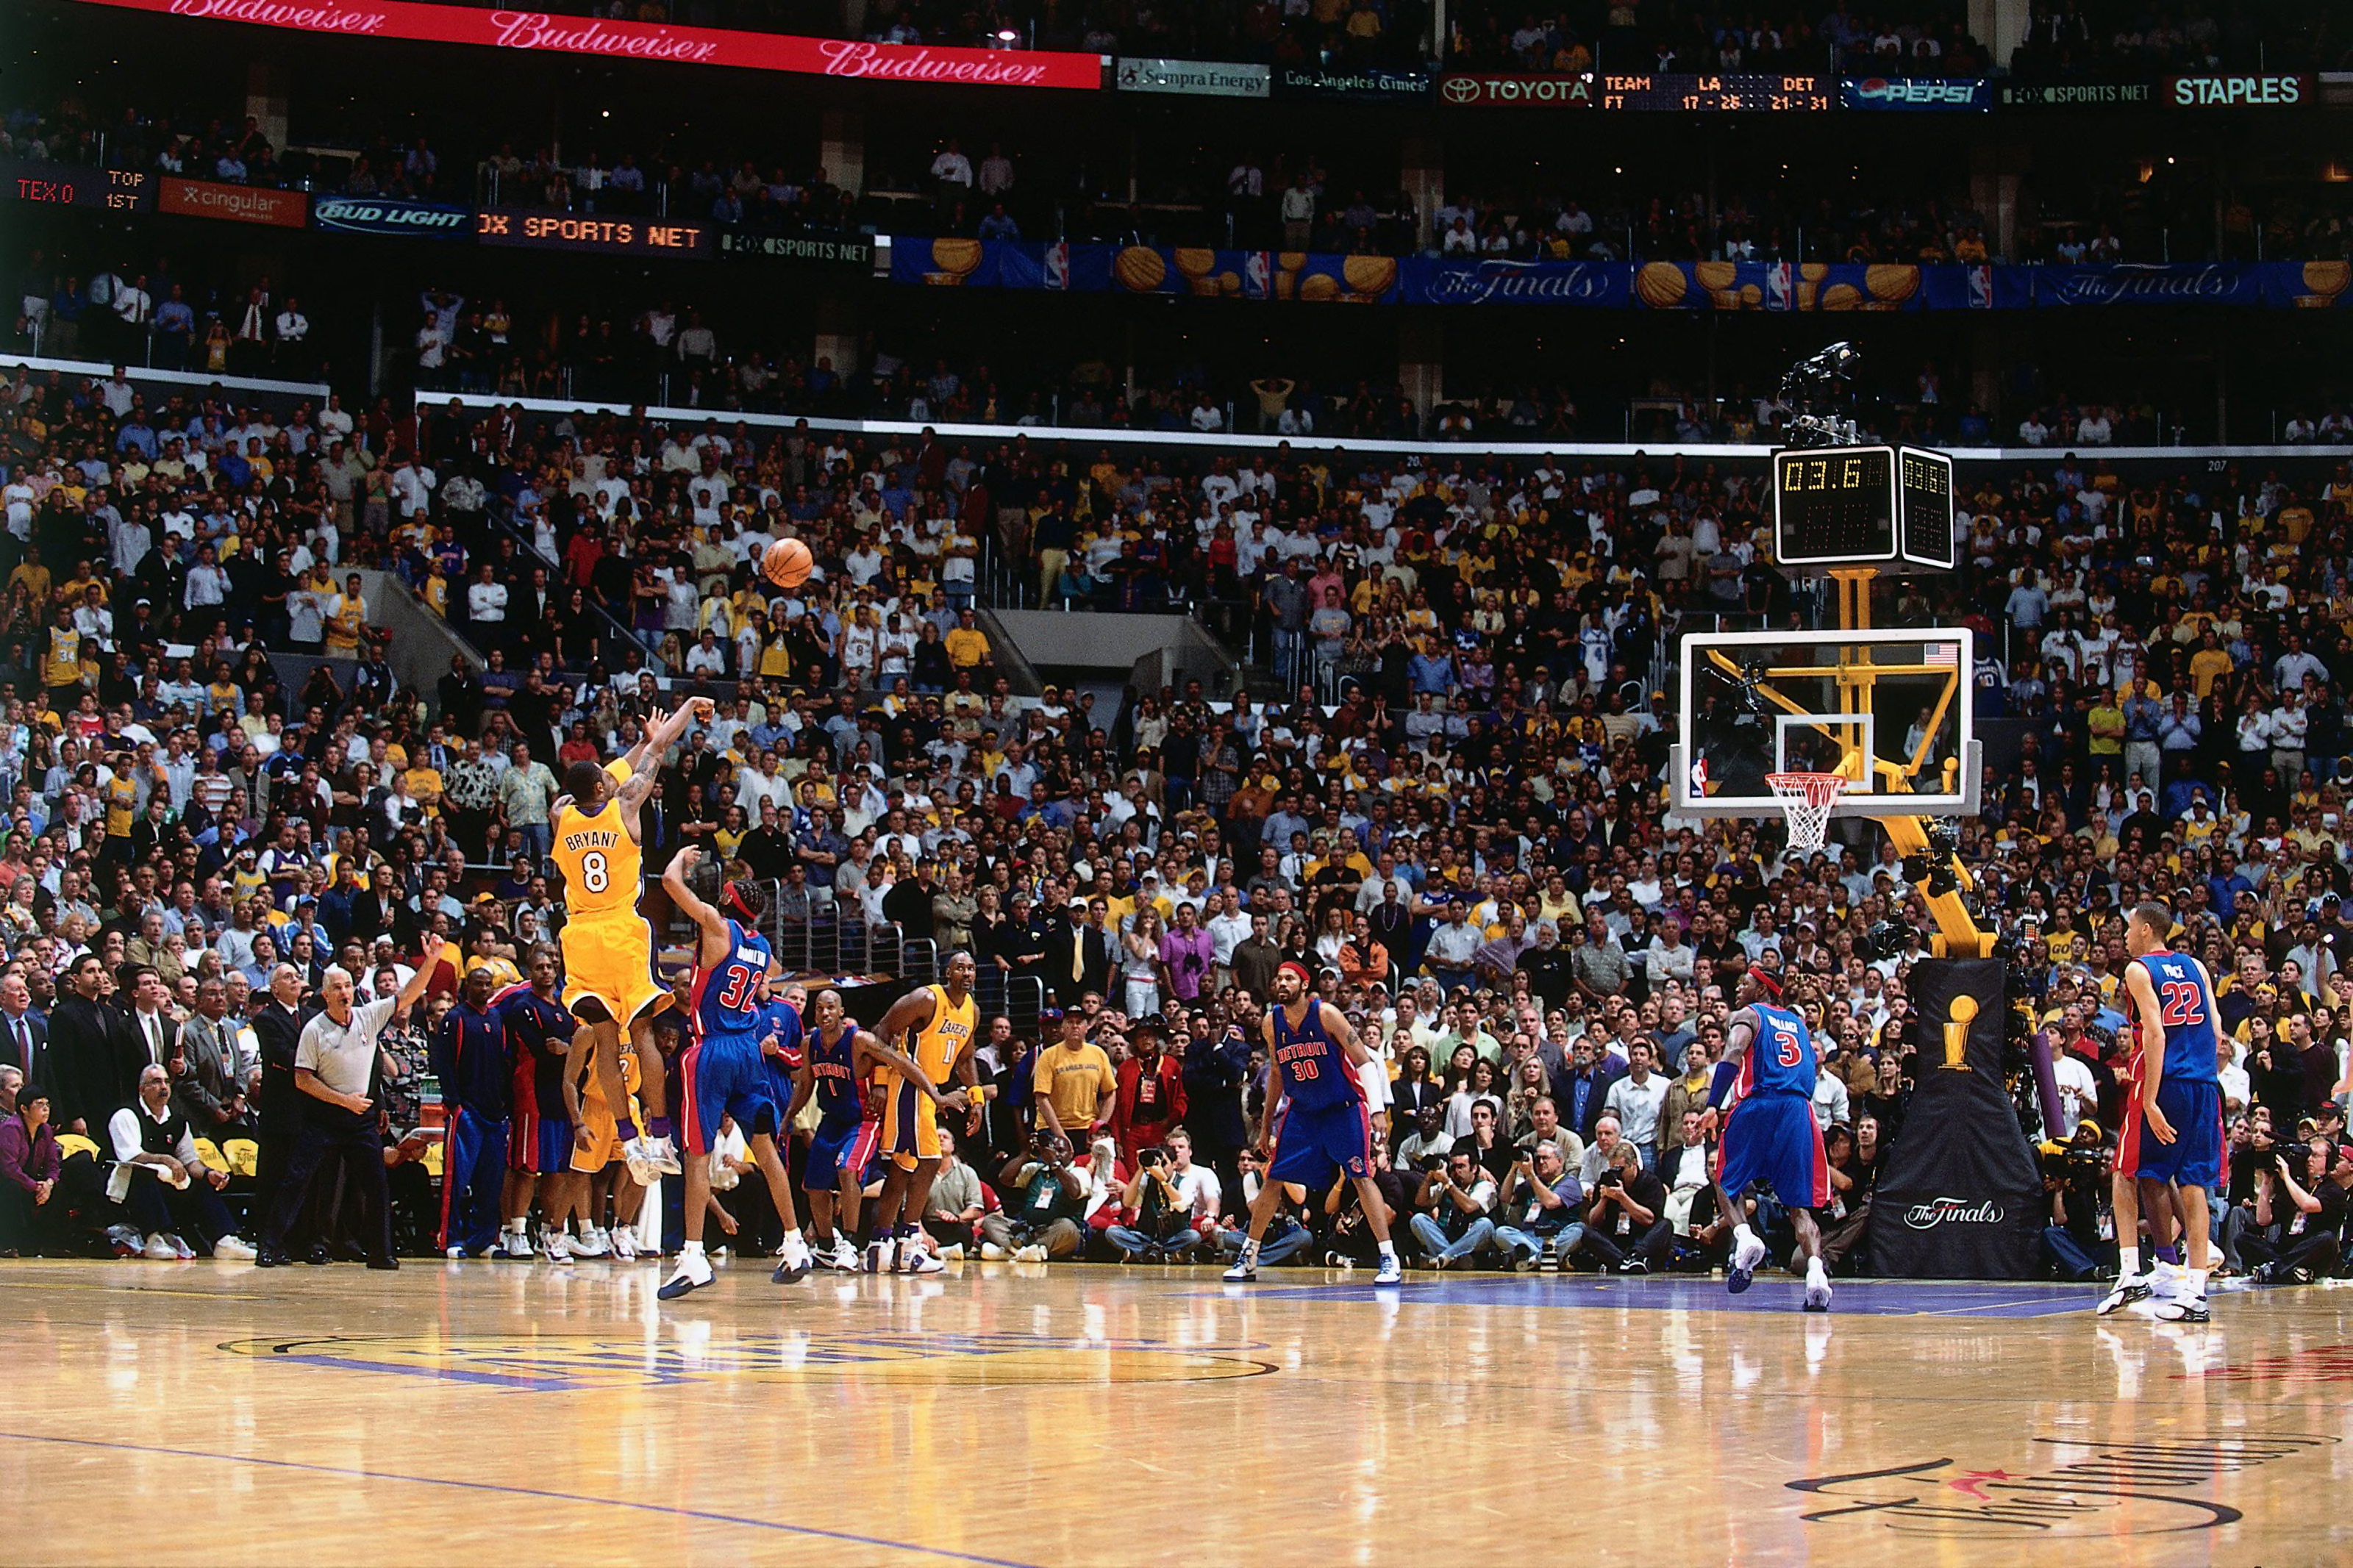 Kobe Bryant's 32 most iconic basketball moments, ranked 